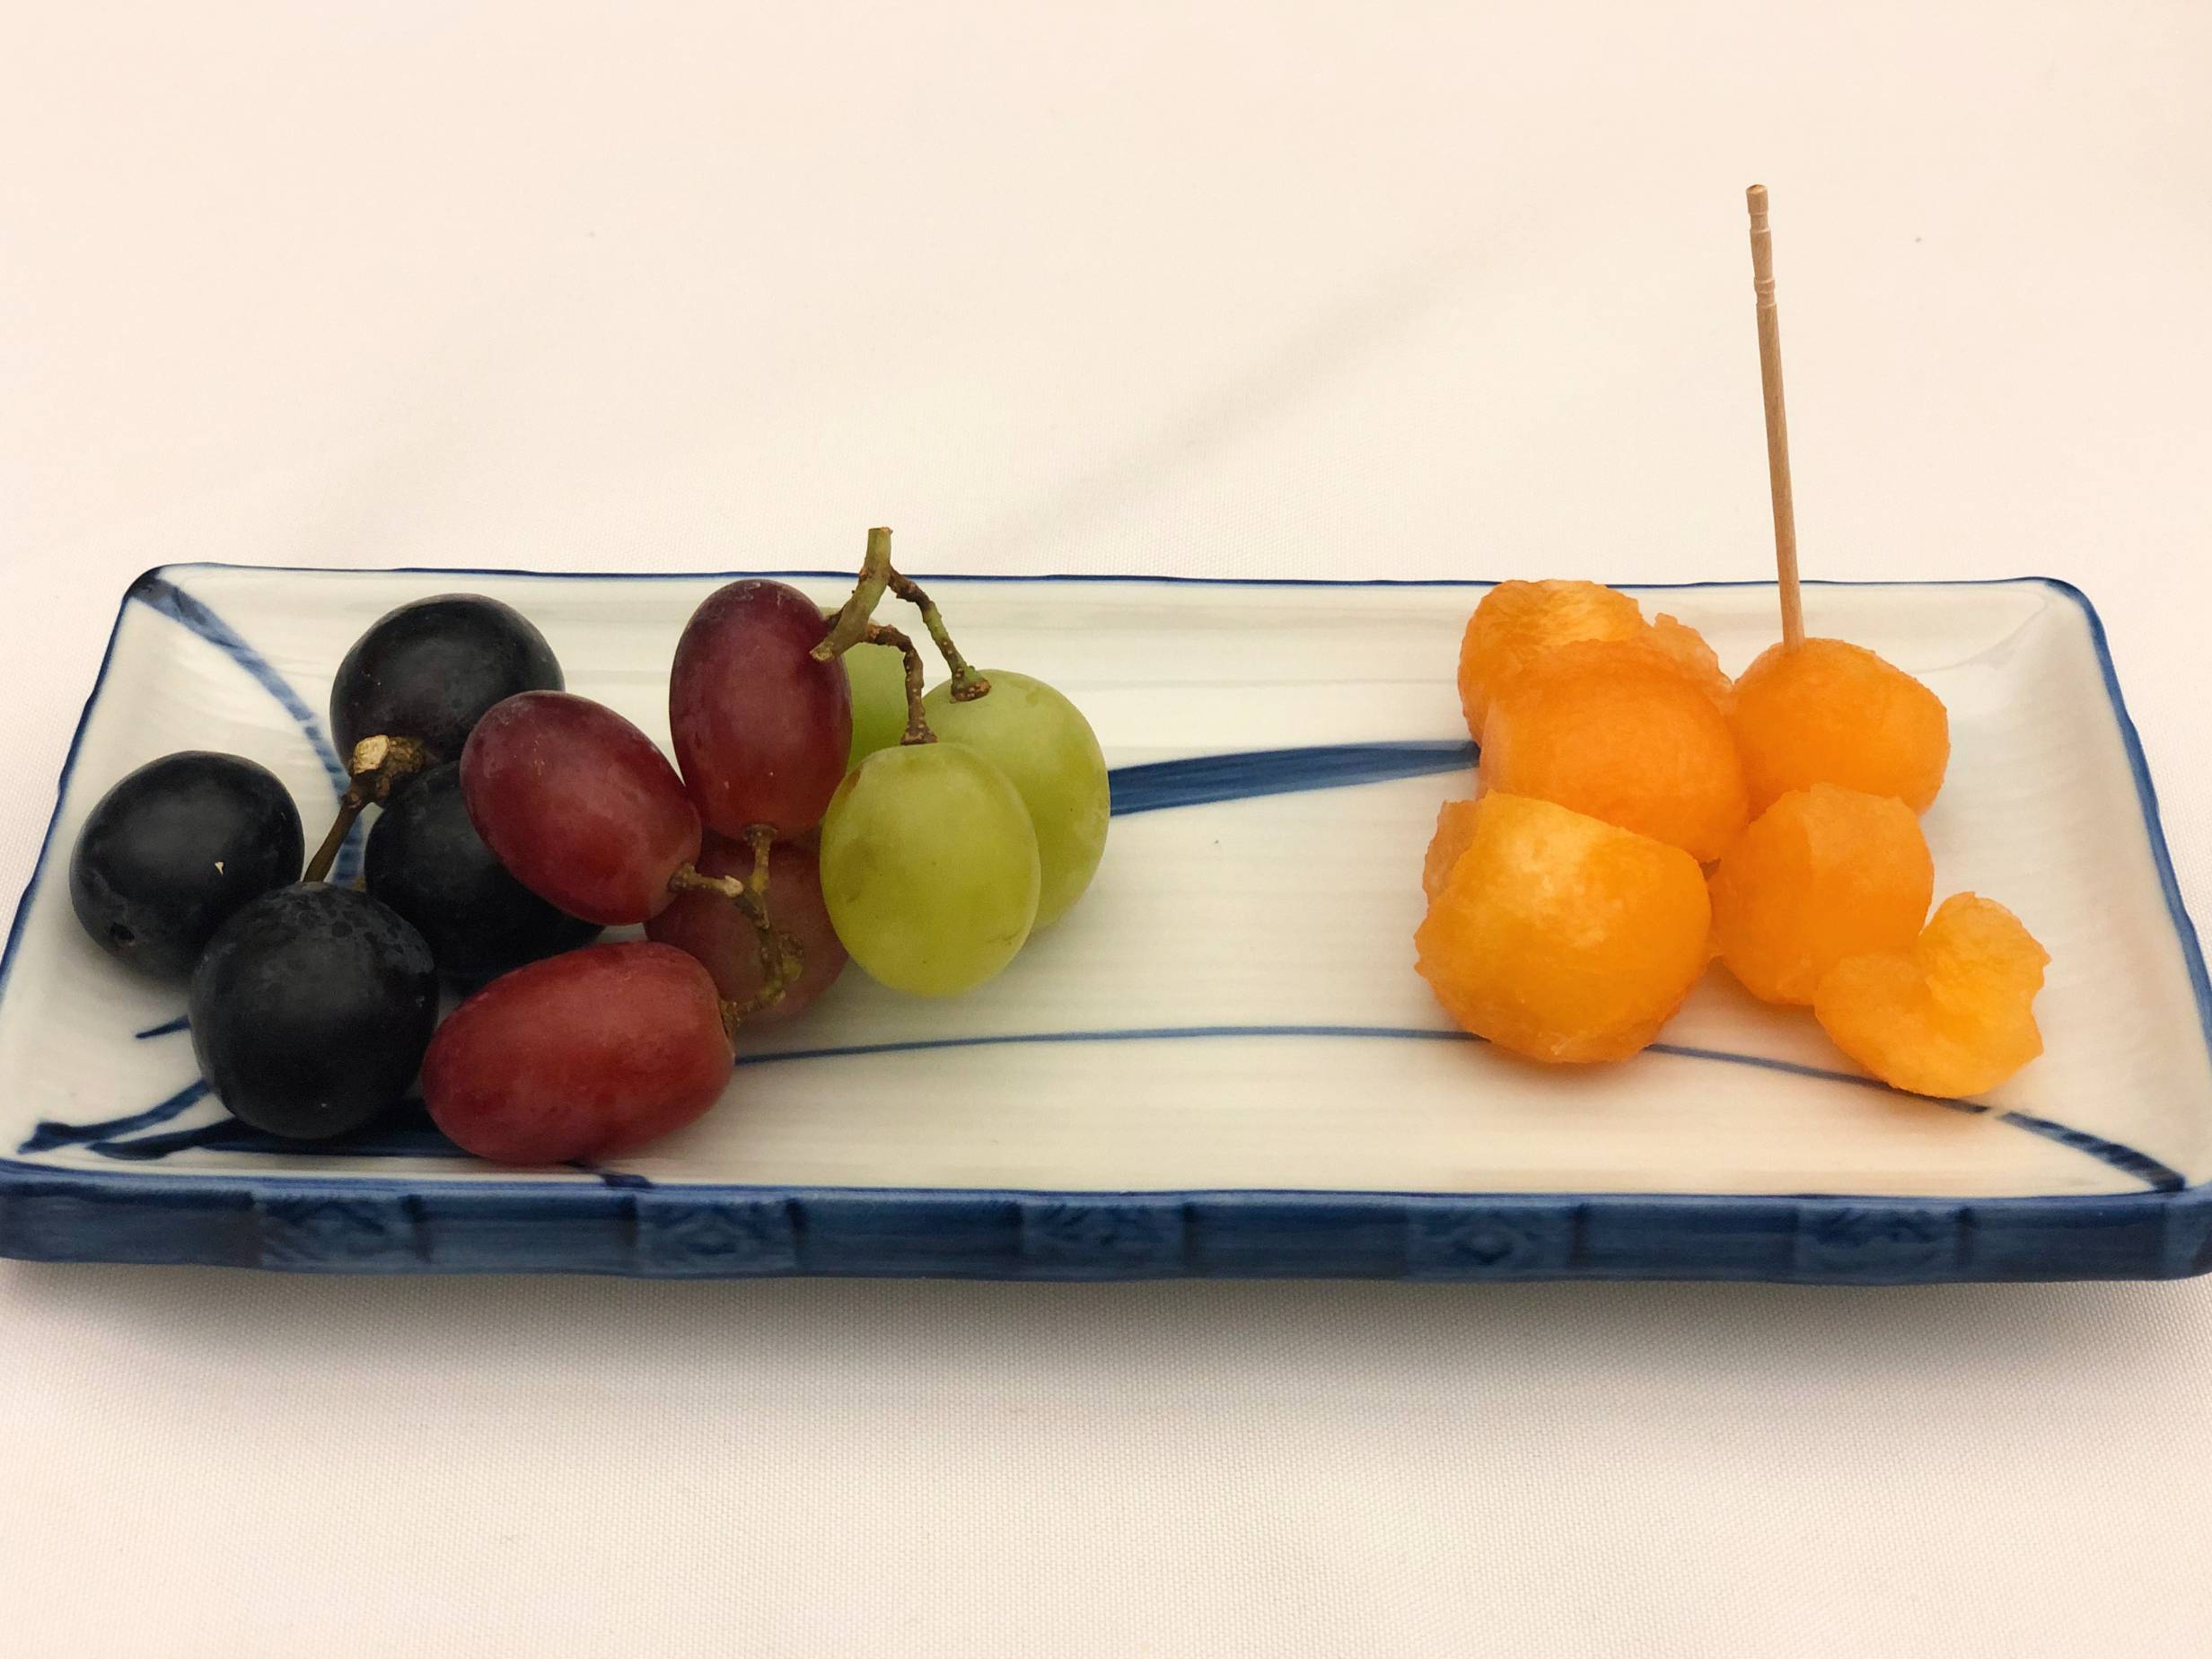 Three black grapes, three red grapes, and three green grapes on the vine are clustered on the left side of a rectangular ceramic plate. On the left, there are balls of cantaloupe with one toothpick stuck in a ball. Photo by Alyssa Buckley.